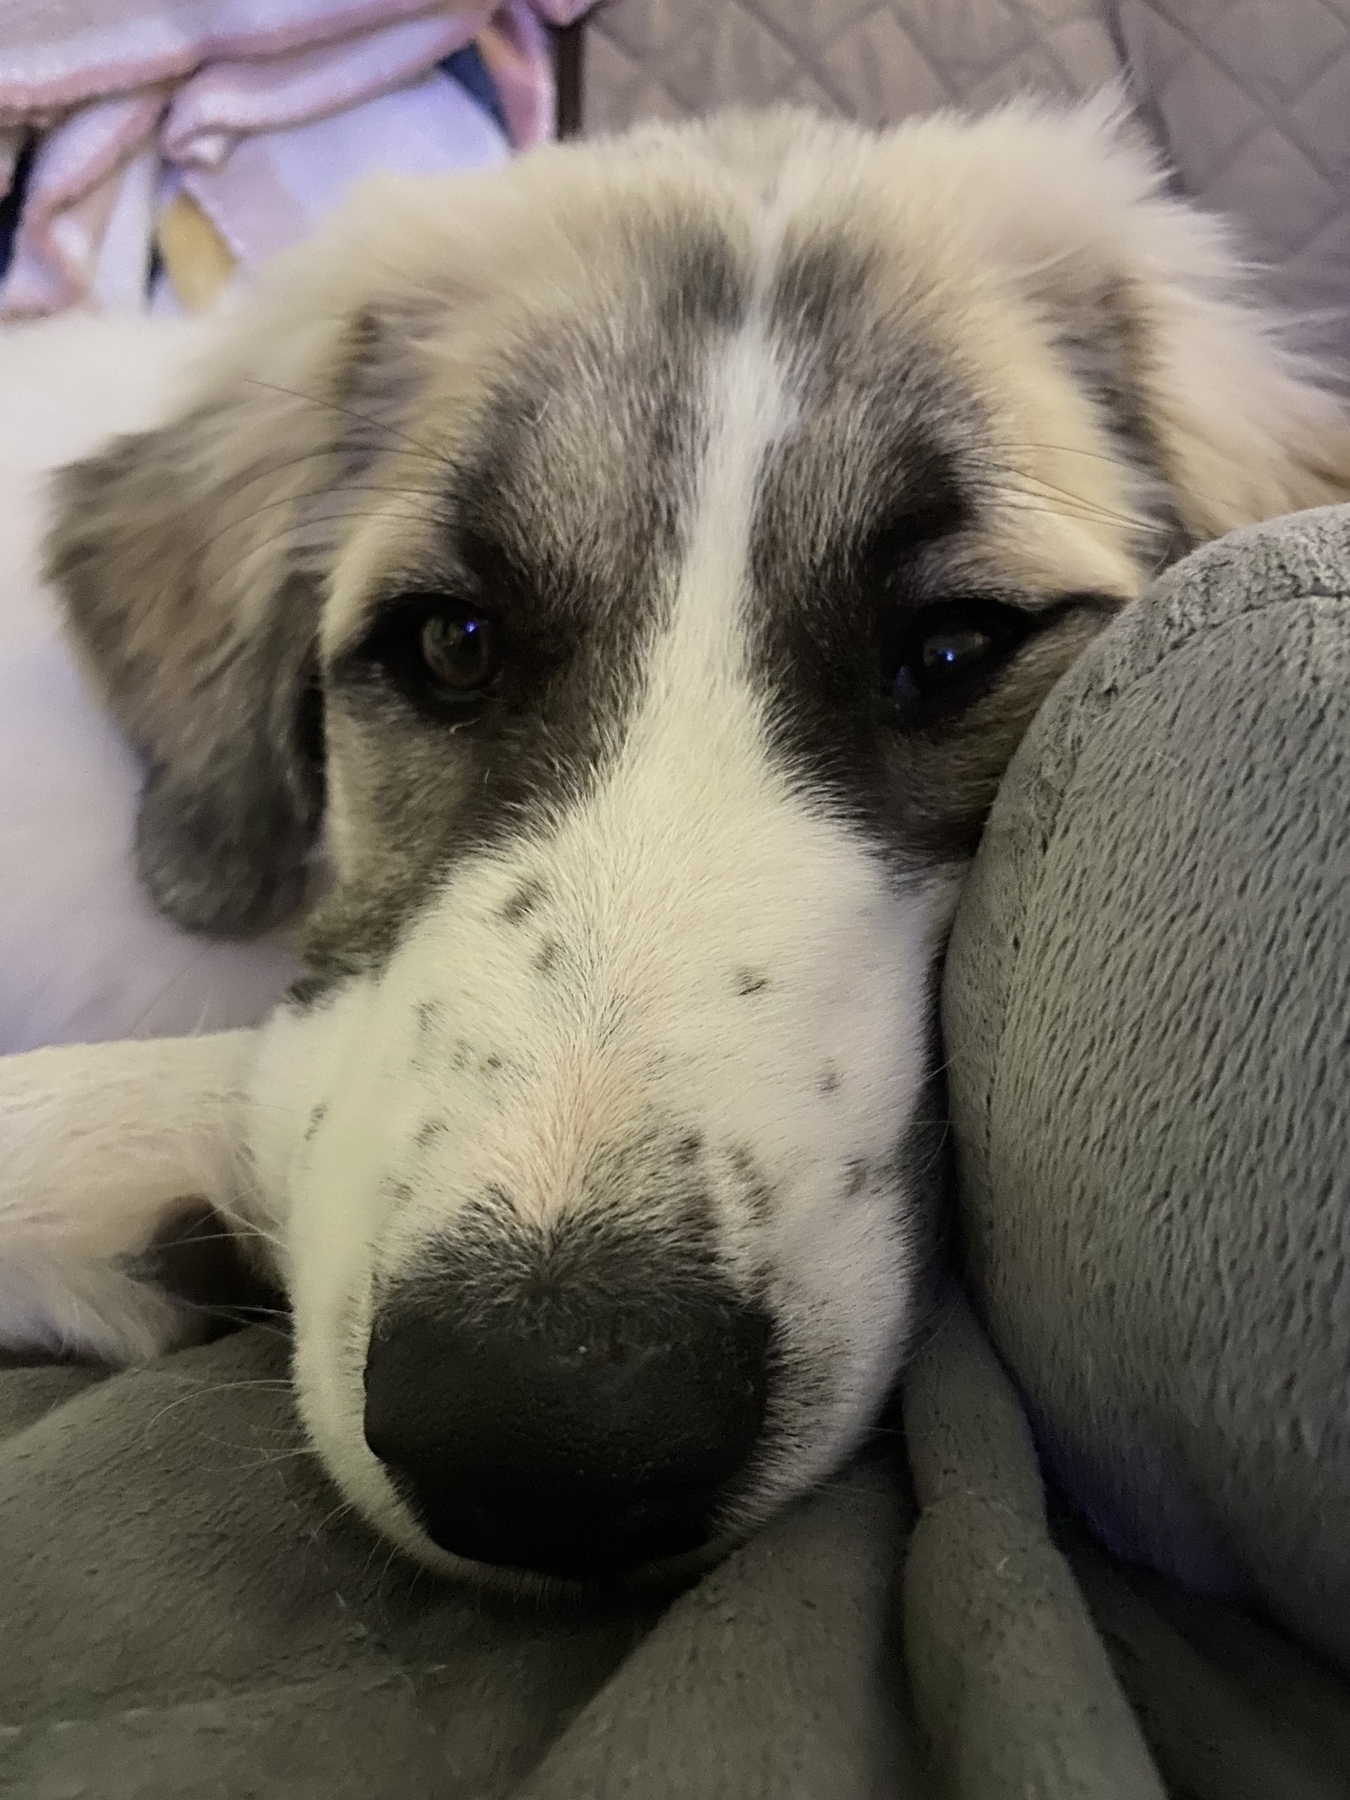 Ms. Gracie, our Great Pyrenees puppy, moving closer to the camera for her closeup.